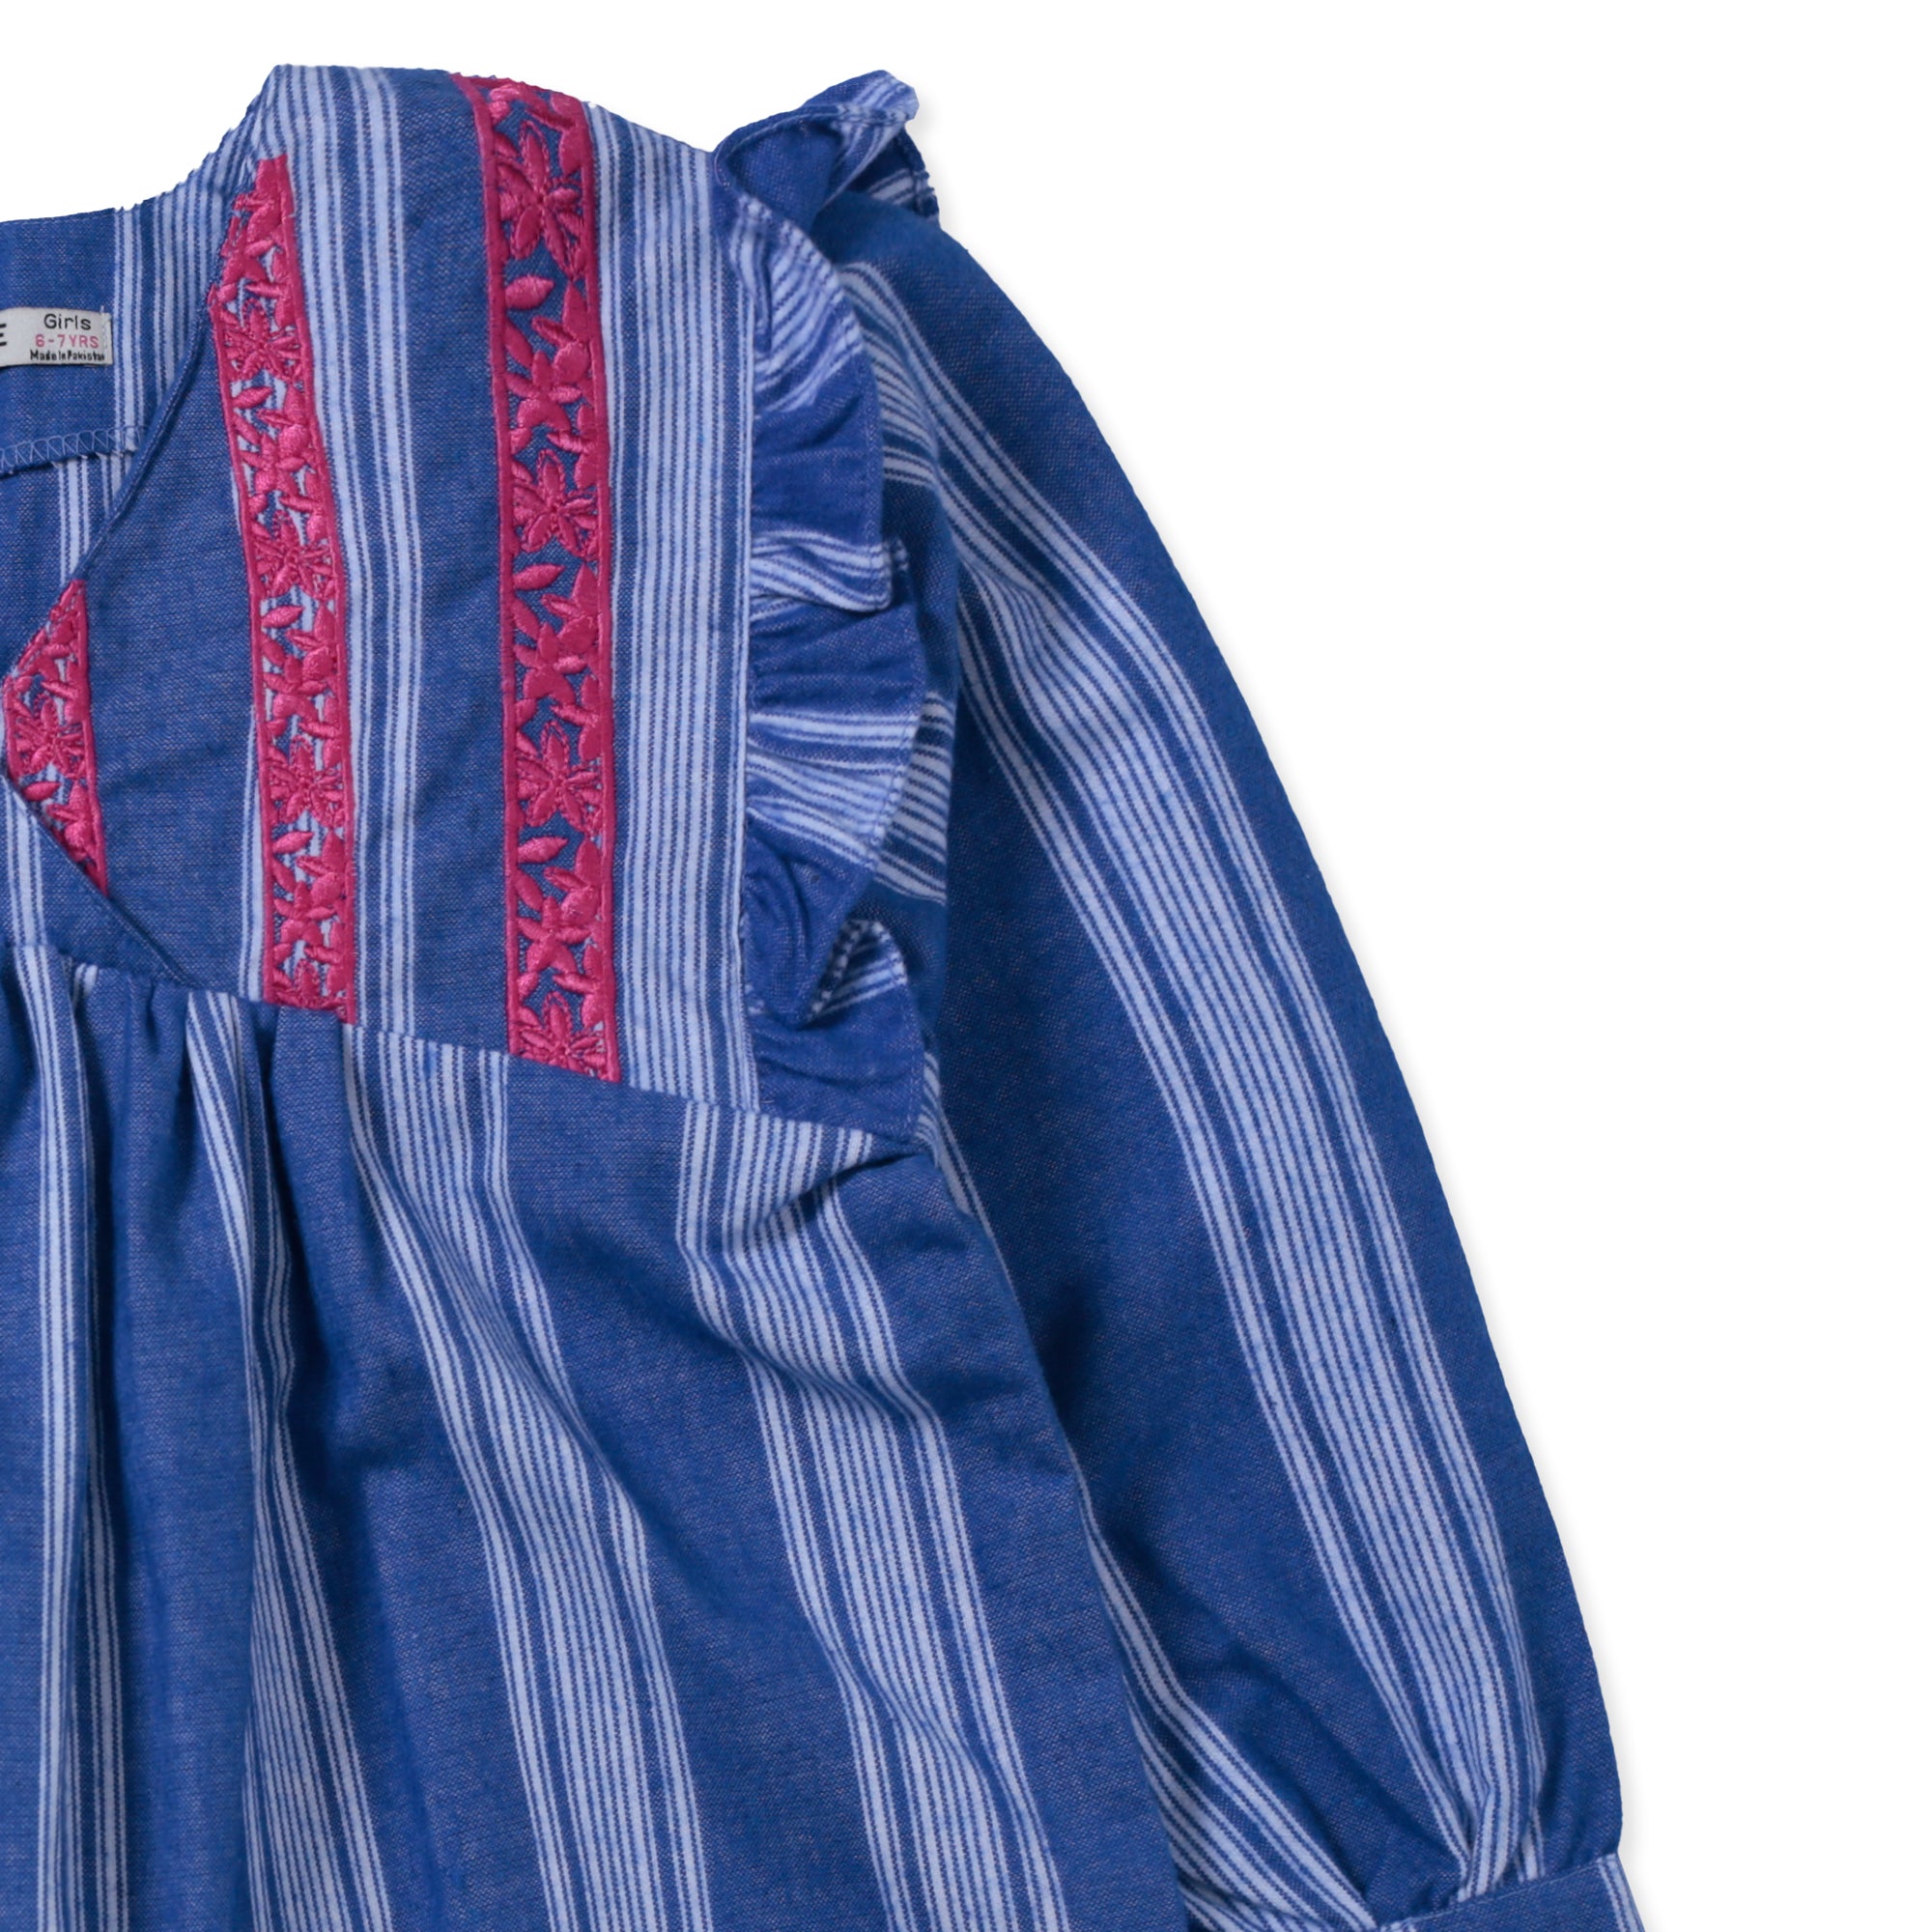 Blue Embroidered Girl's Woven Top